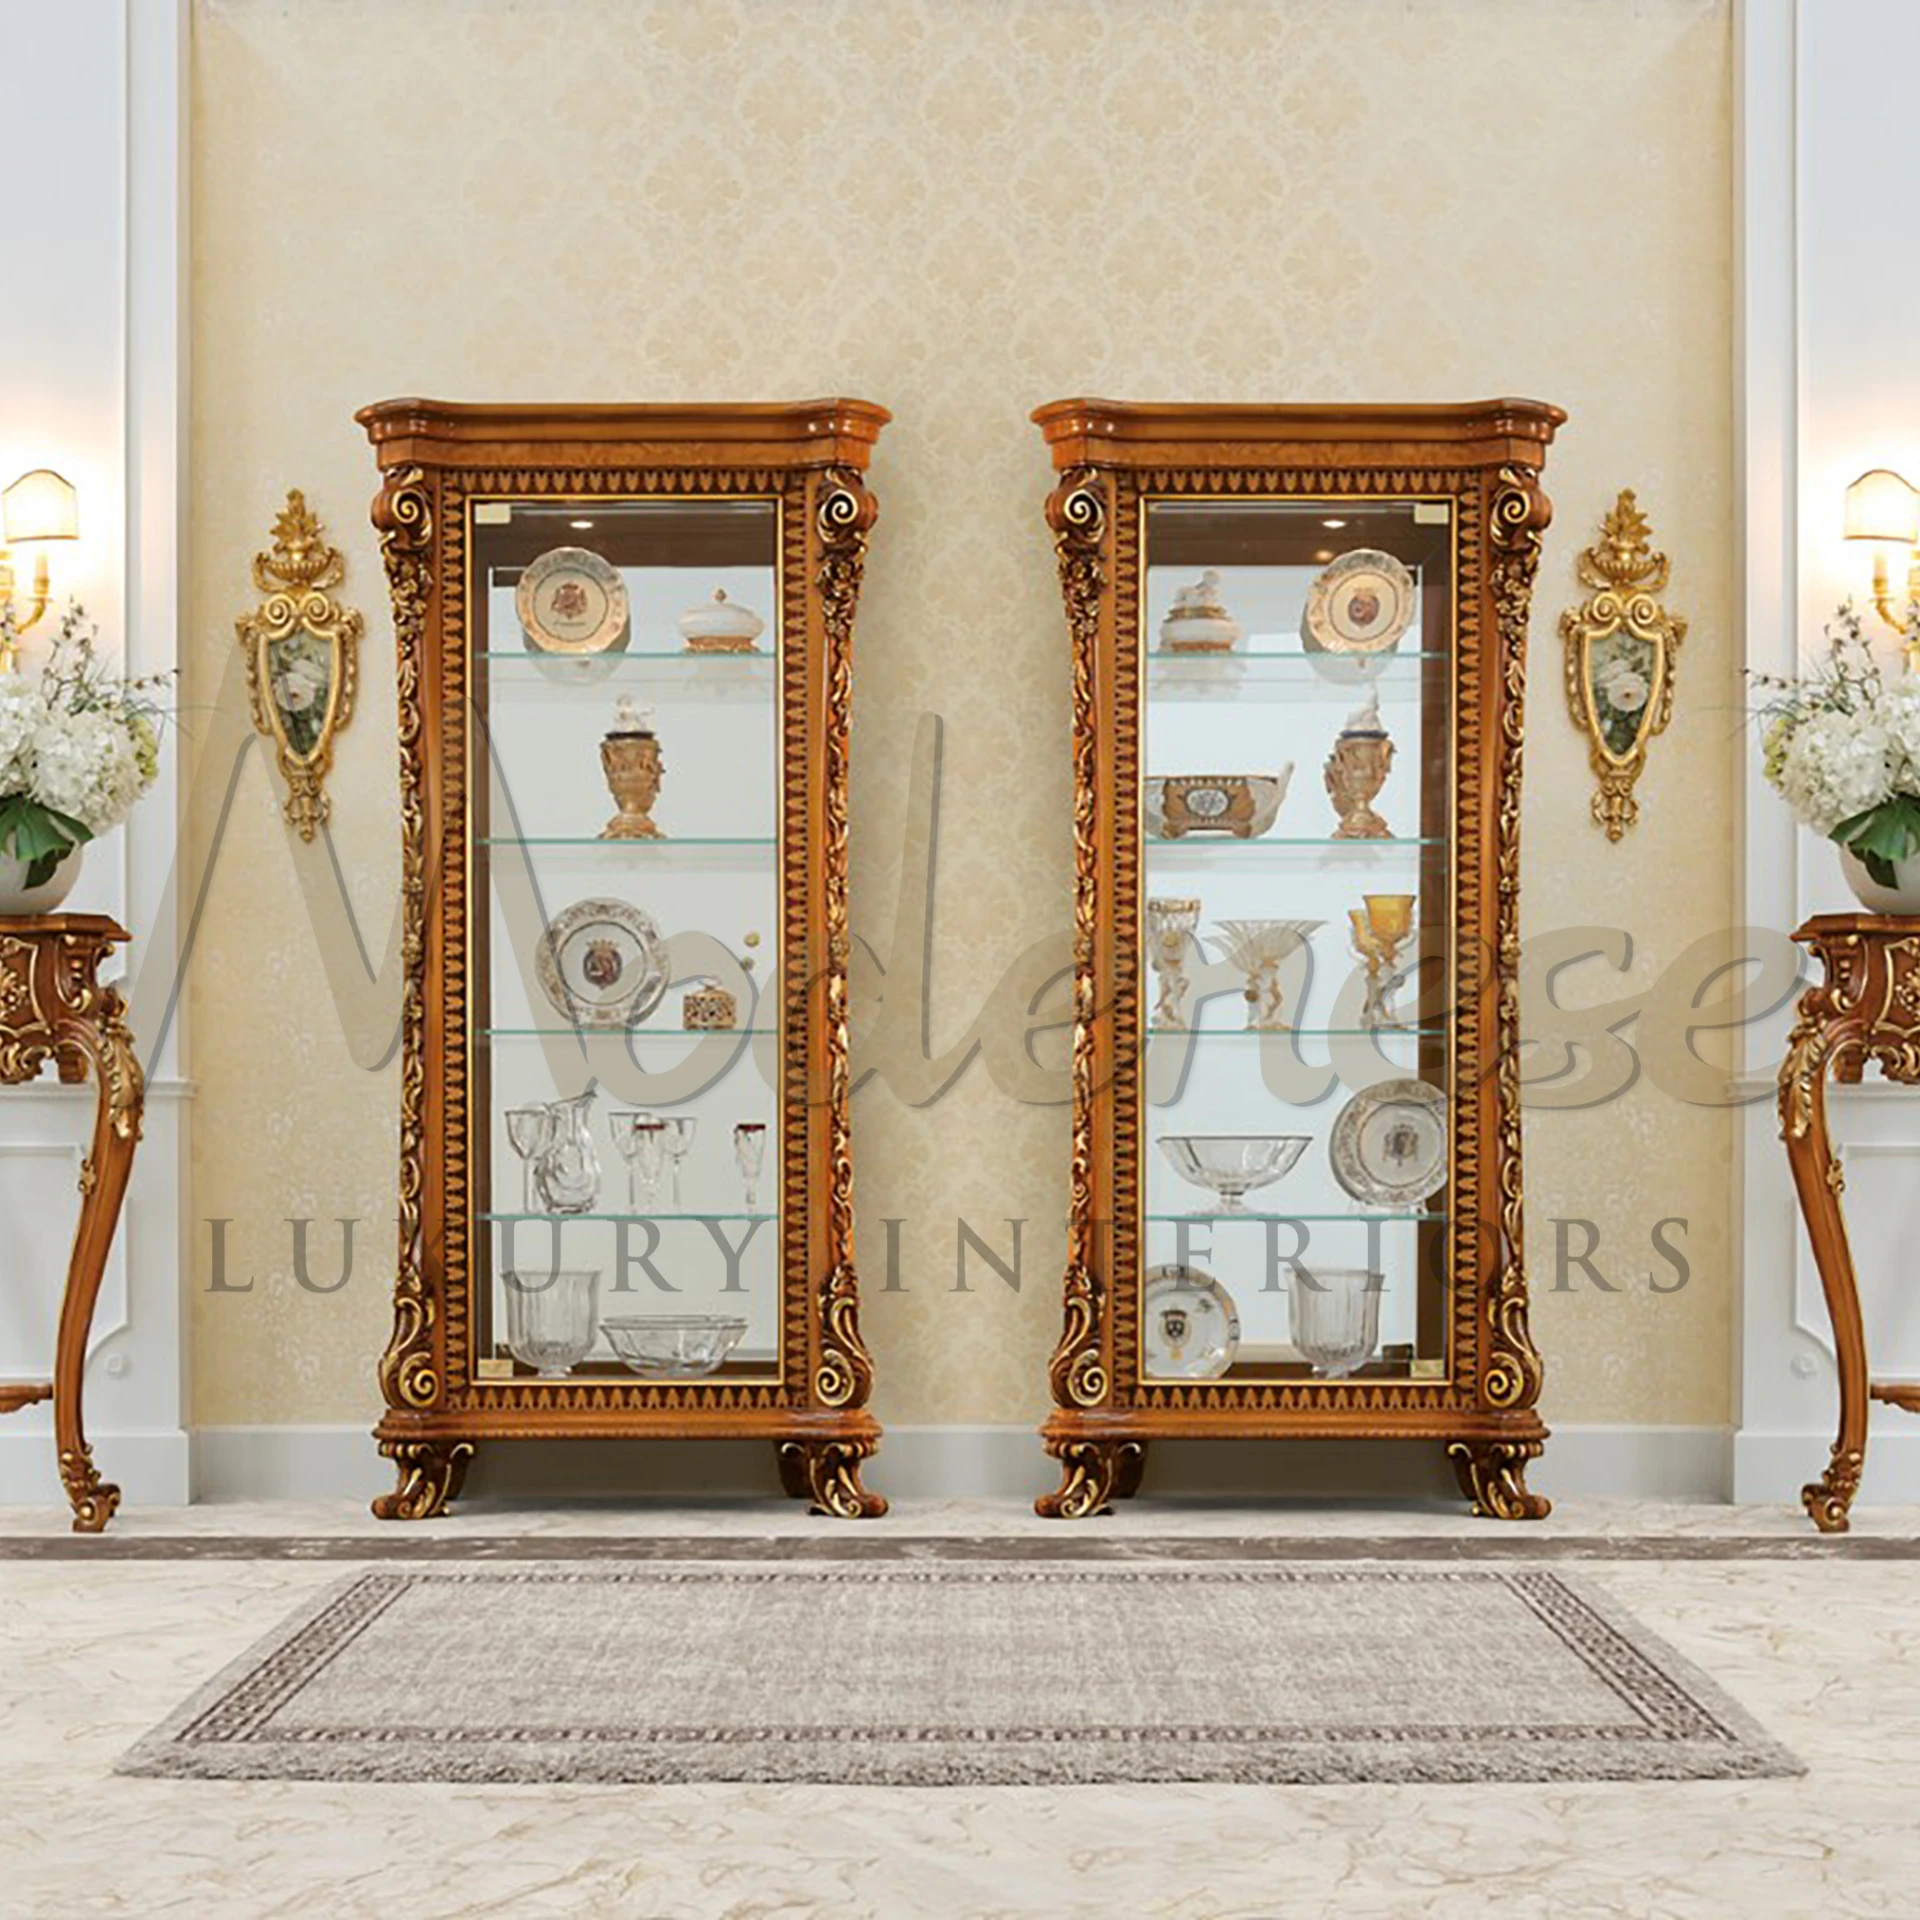 Discover Modenese Furniture's stunning vitrine, ideal for showcasing dining room treasures. Its expansive glass panels illuminate crystalware with reflected chandelier brilliance.